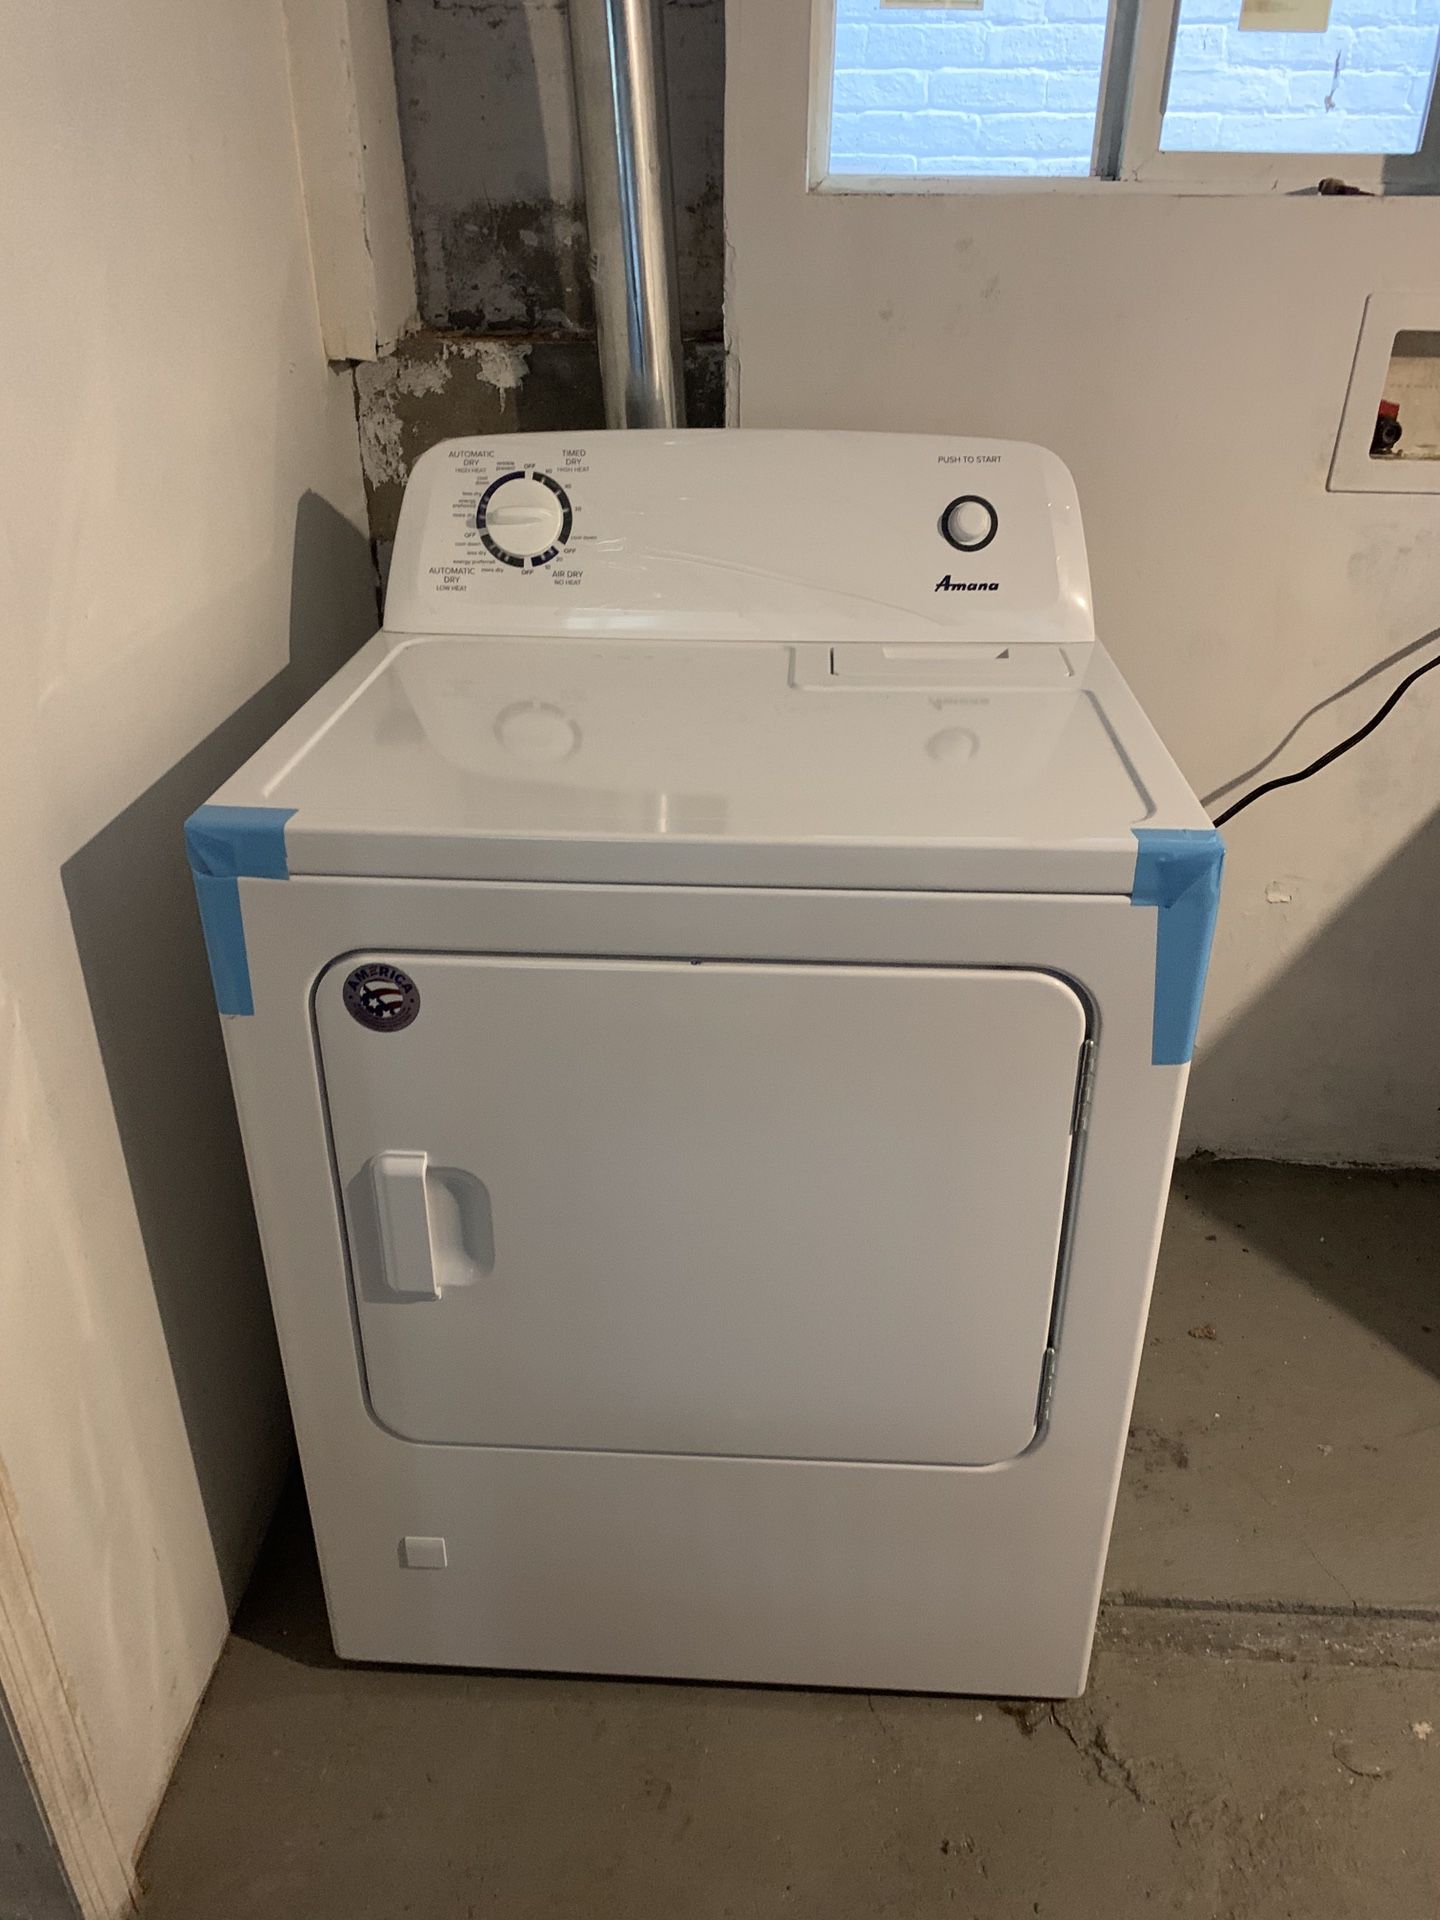 Large Amana gas-vented dryer in new condition